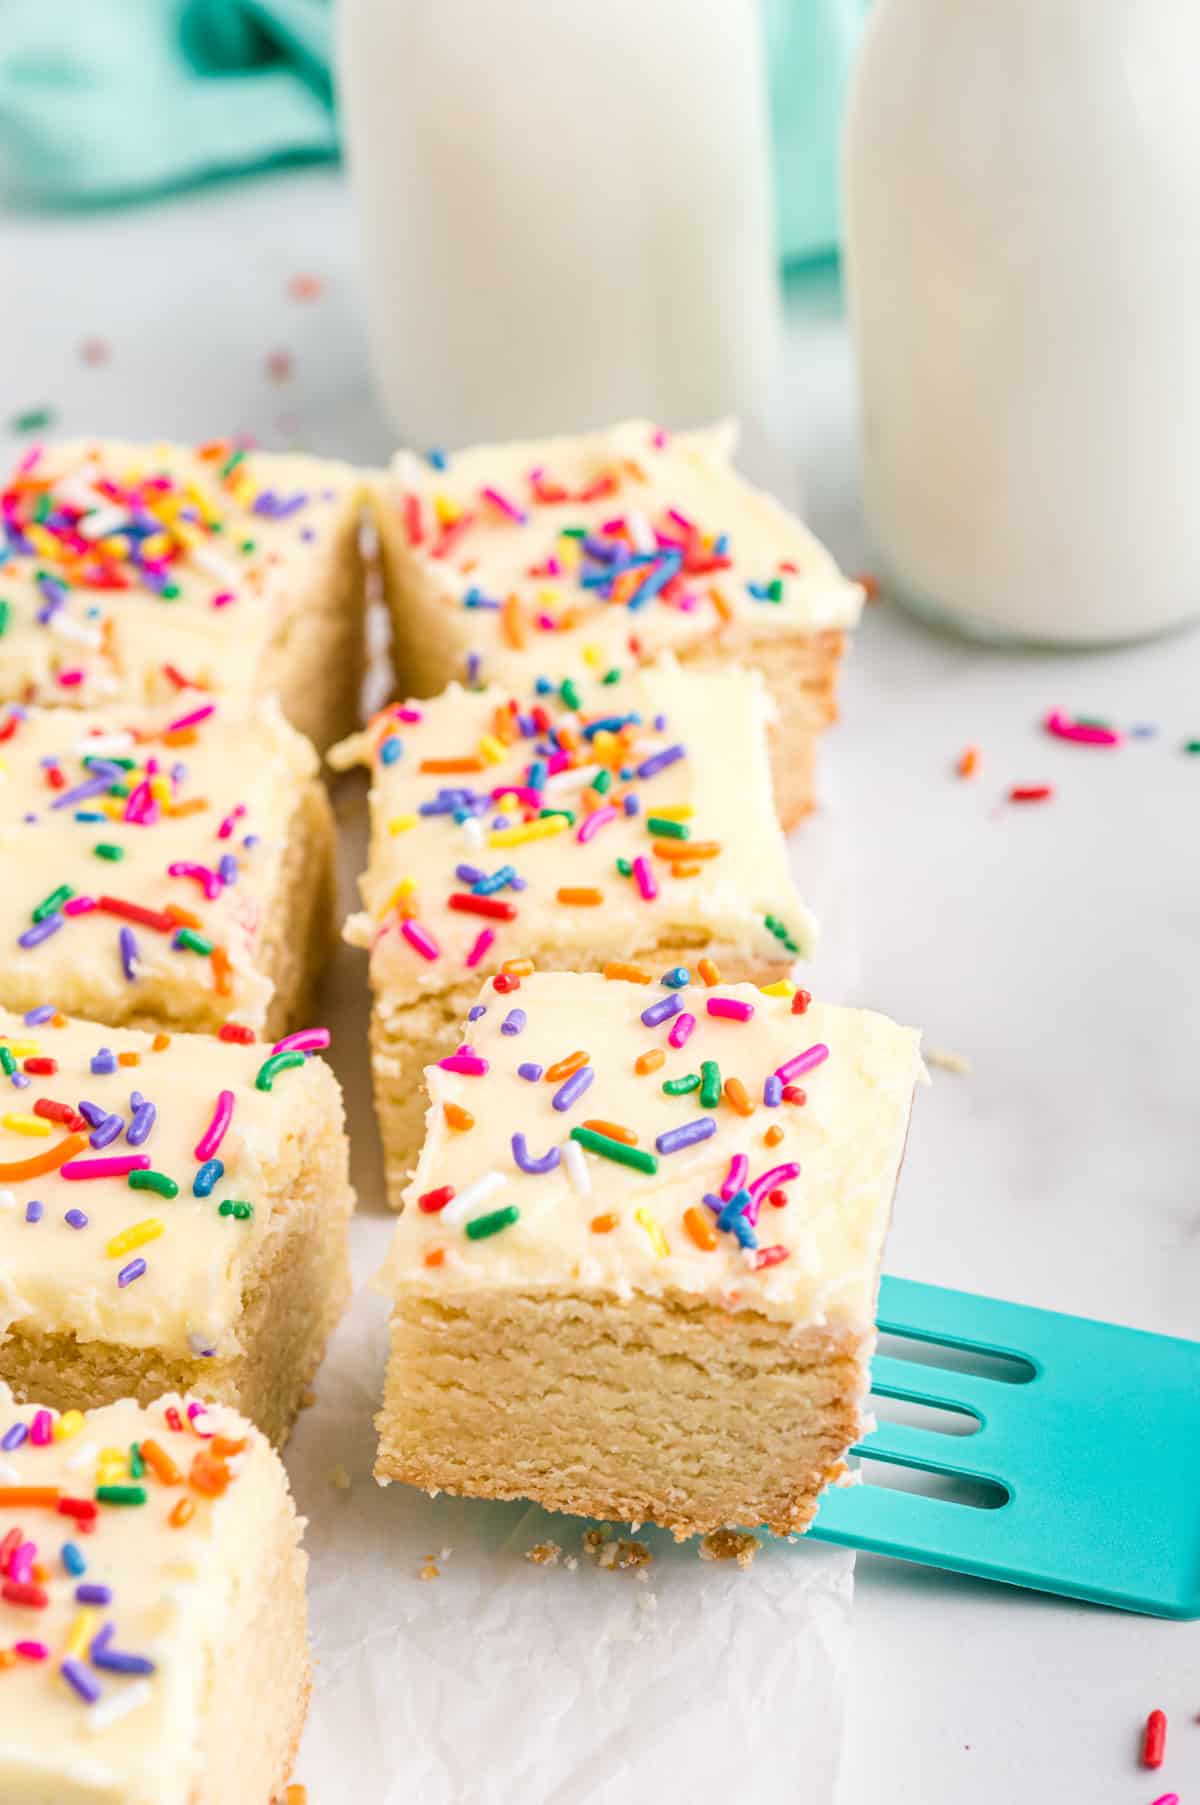 Sugar Cookies Bars with vanilla frosting and rainbow sprinkles, cut into squares and being served with a teal spatula. Milk in glasses can be seen behind the bars.